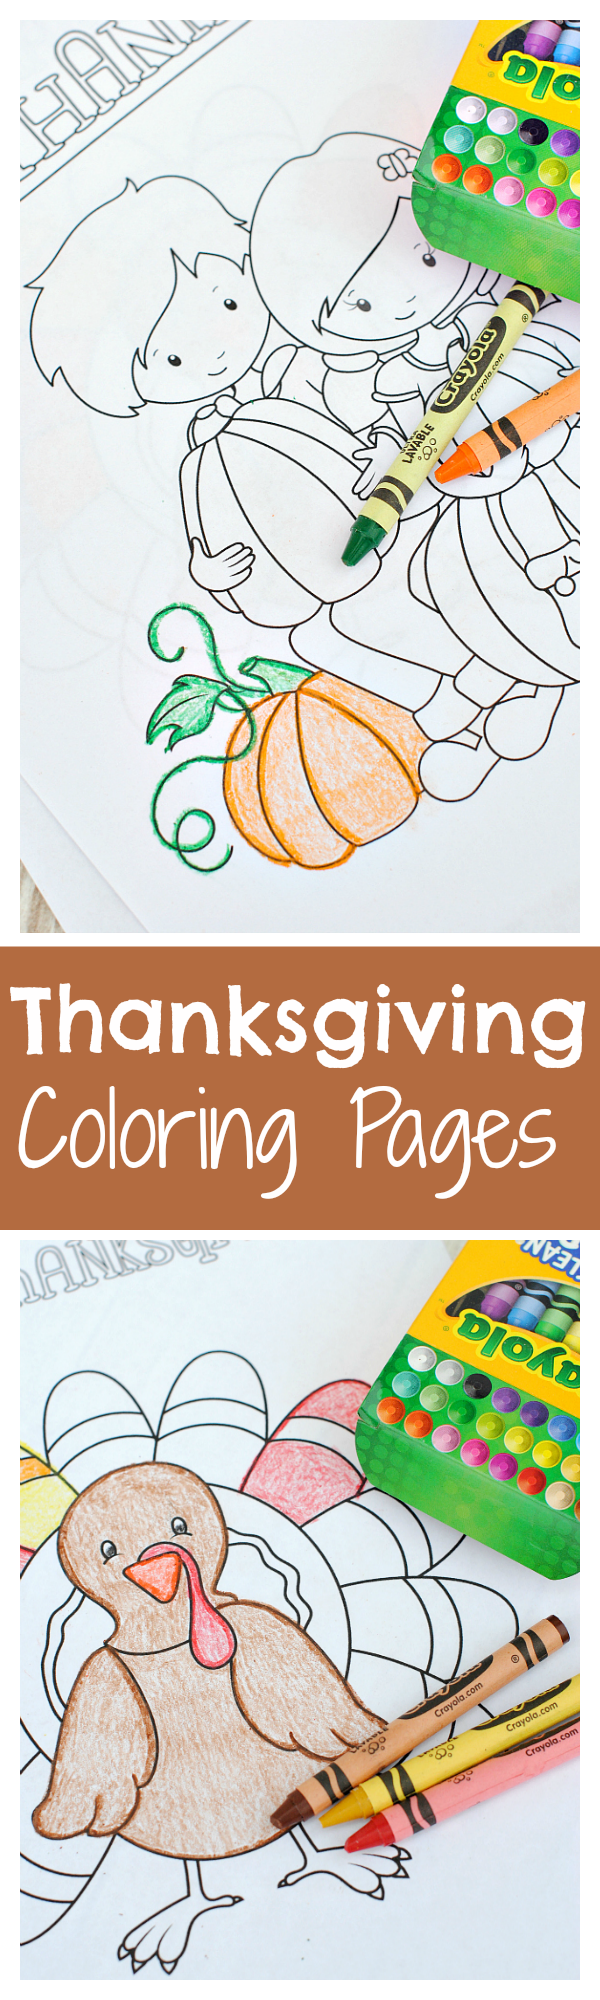 Thanksgiving Coloring Pages - Crazy Little Projects